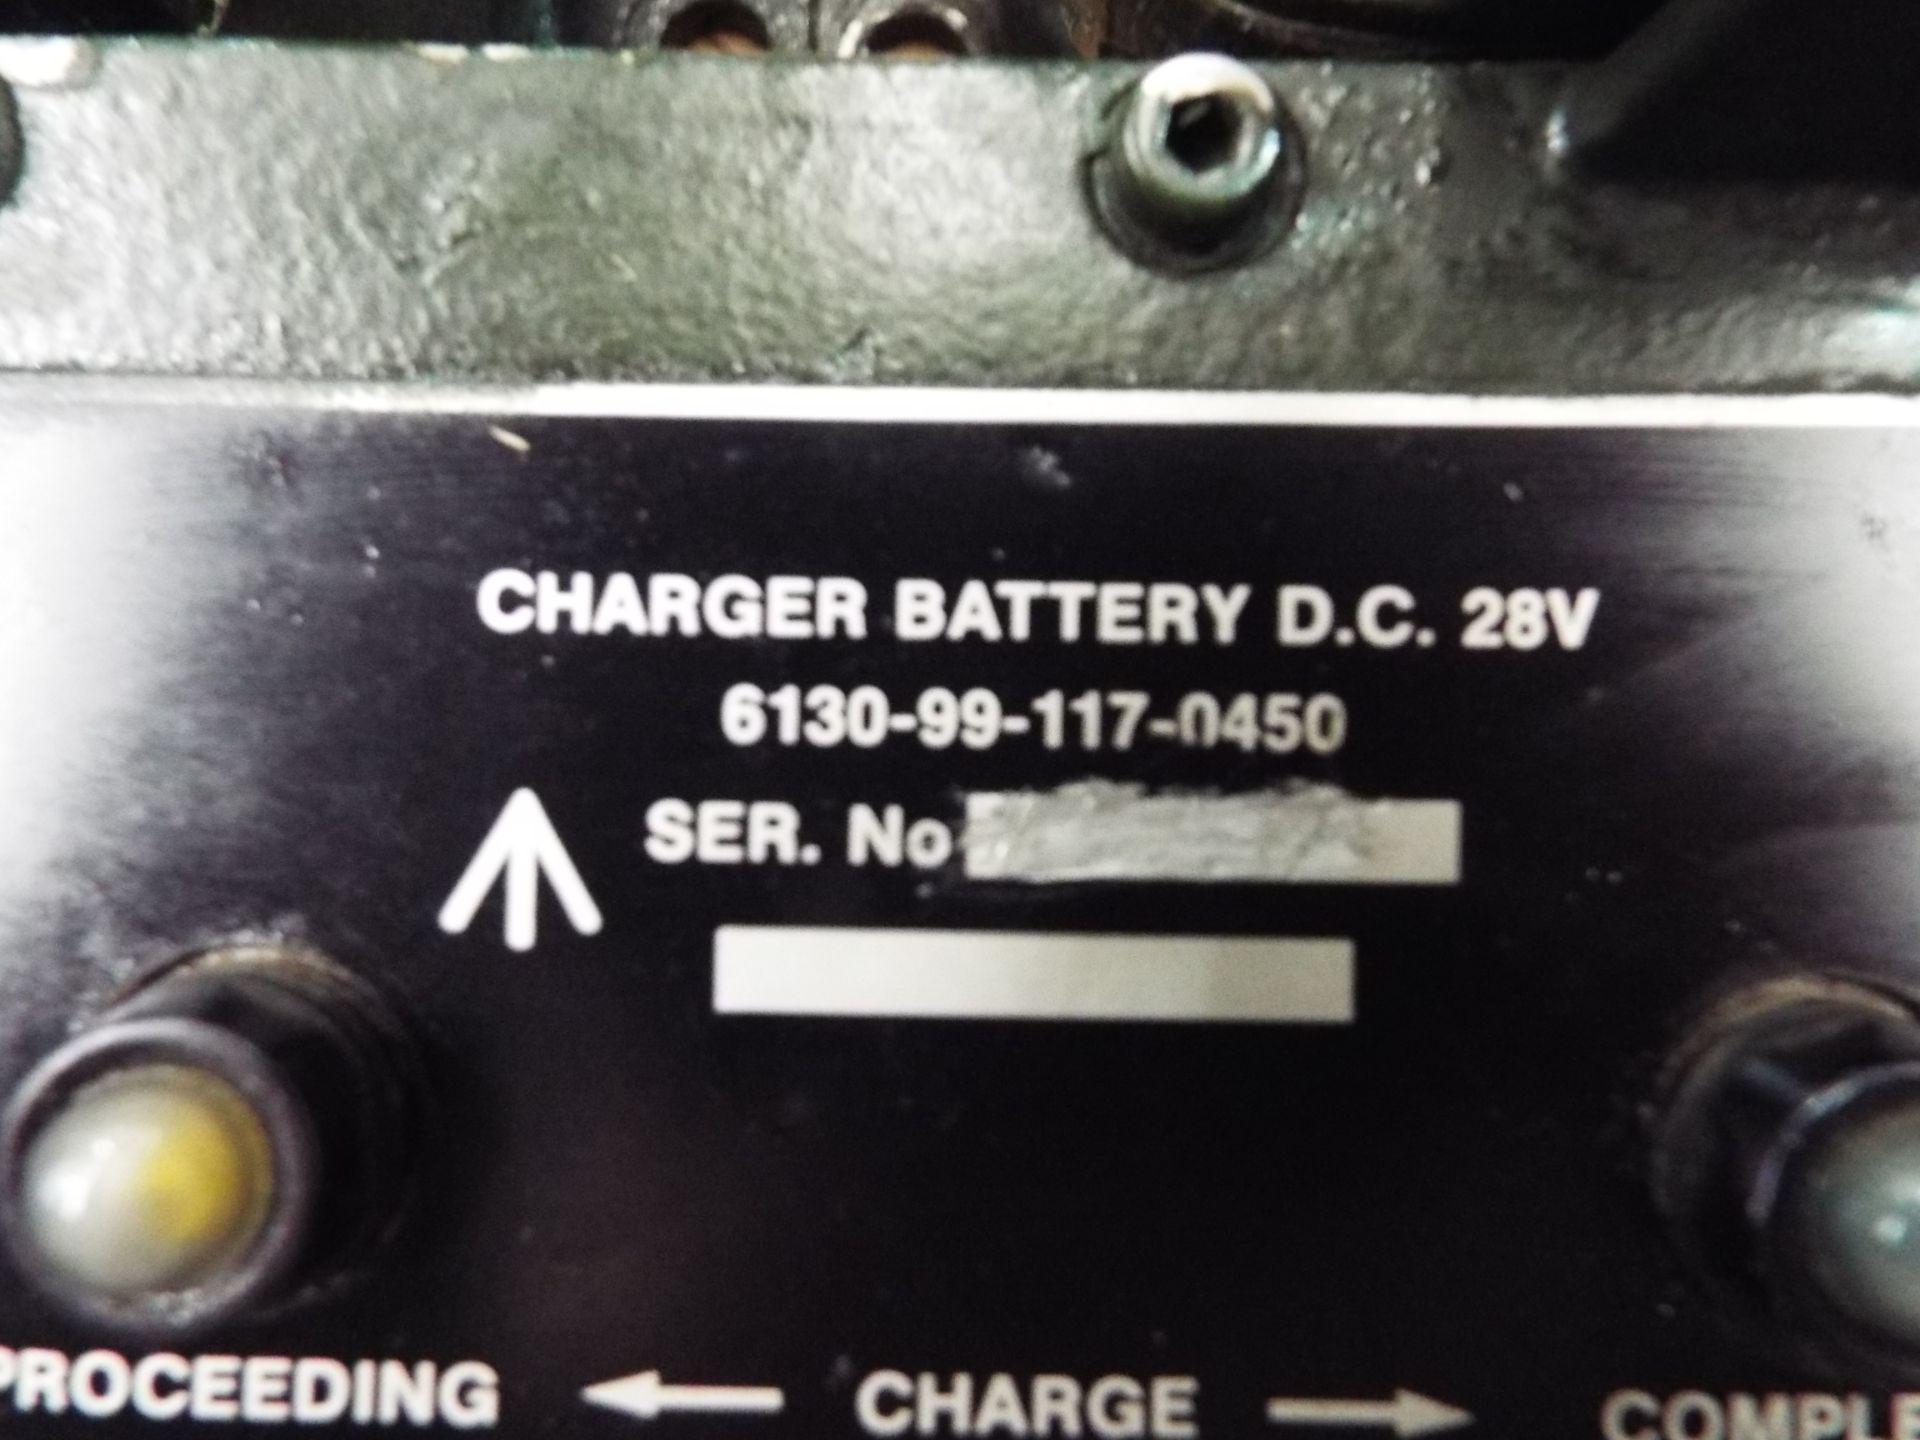 3 x Clansman D.C. 28V Battery Chargers - Image 3 of 4